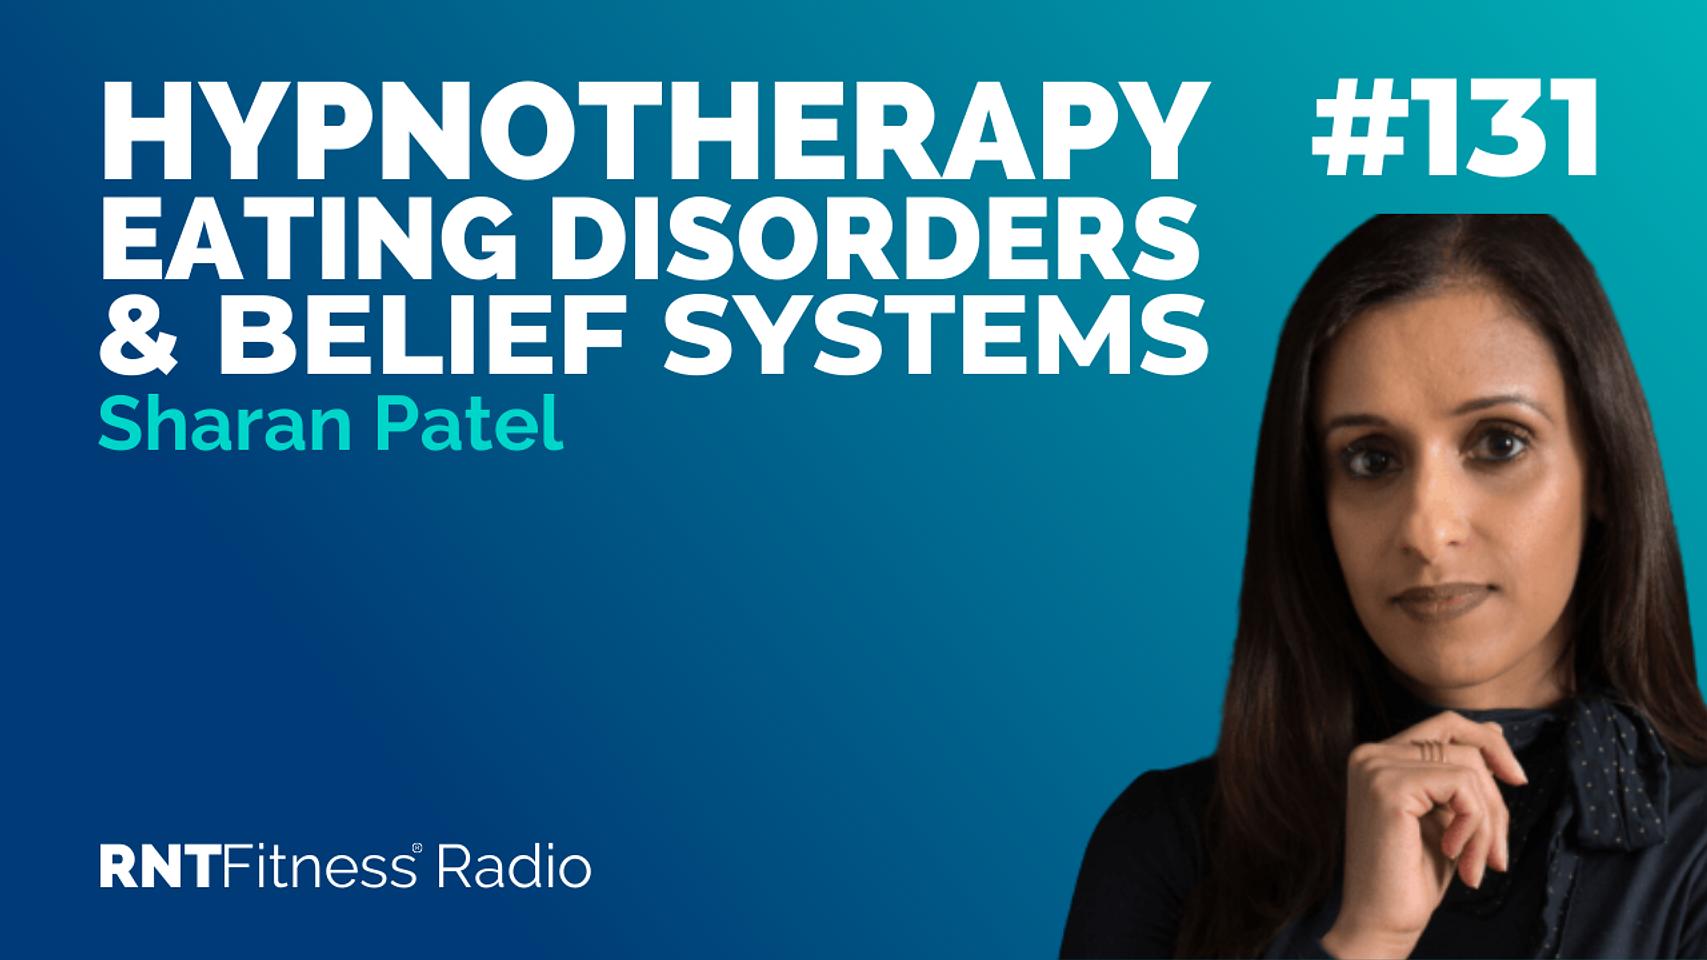 Ep. 131 - Hypnotherapy, Eating Disorders & Shaping Belief Systems w/ Sharan Patel